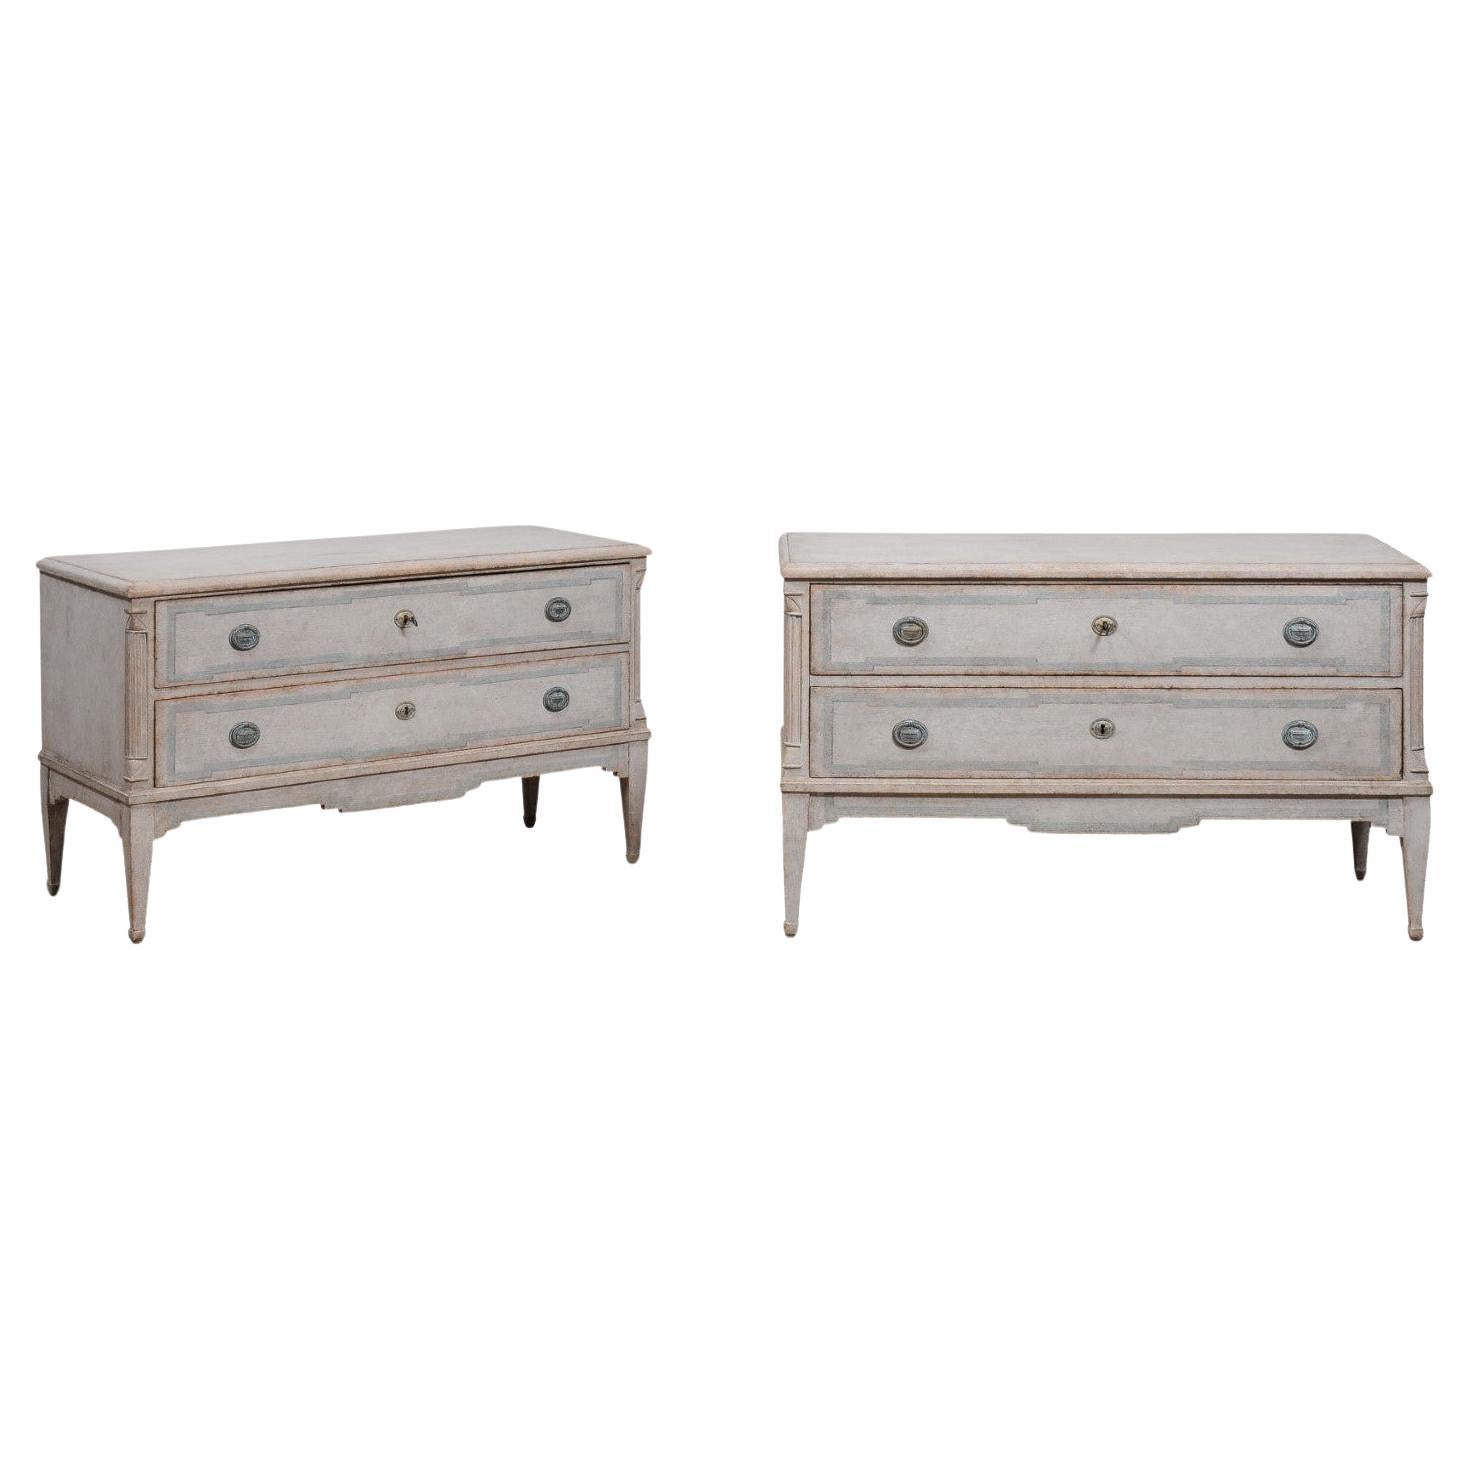 Danish 1820s Light Gray Painted Two-Drawer Chests with Semi-Columns, a Pair For Sale